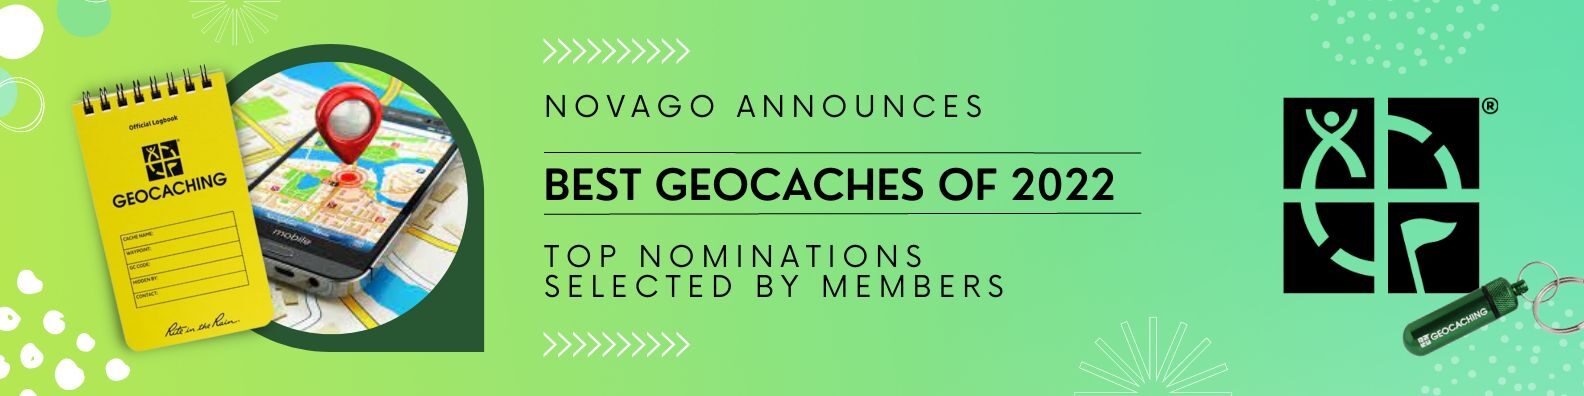 NoVAGO Announces Best Geocaches of 2022. Top Nominations Selected by Members